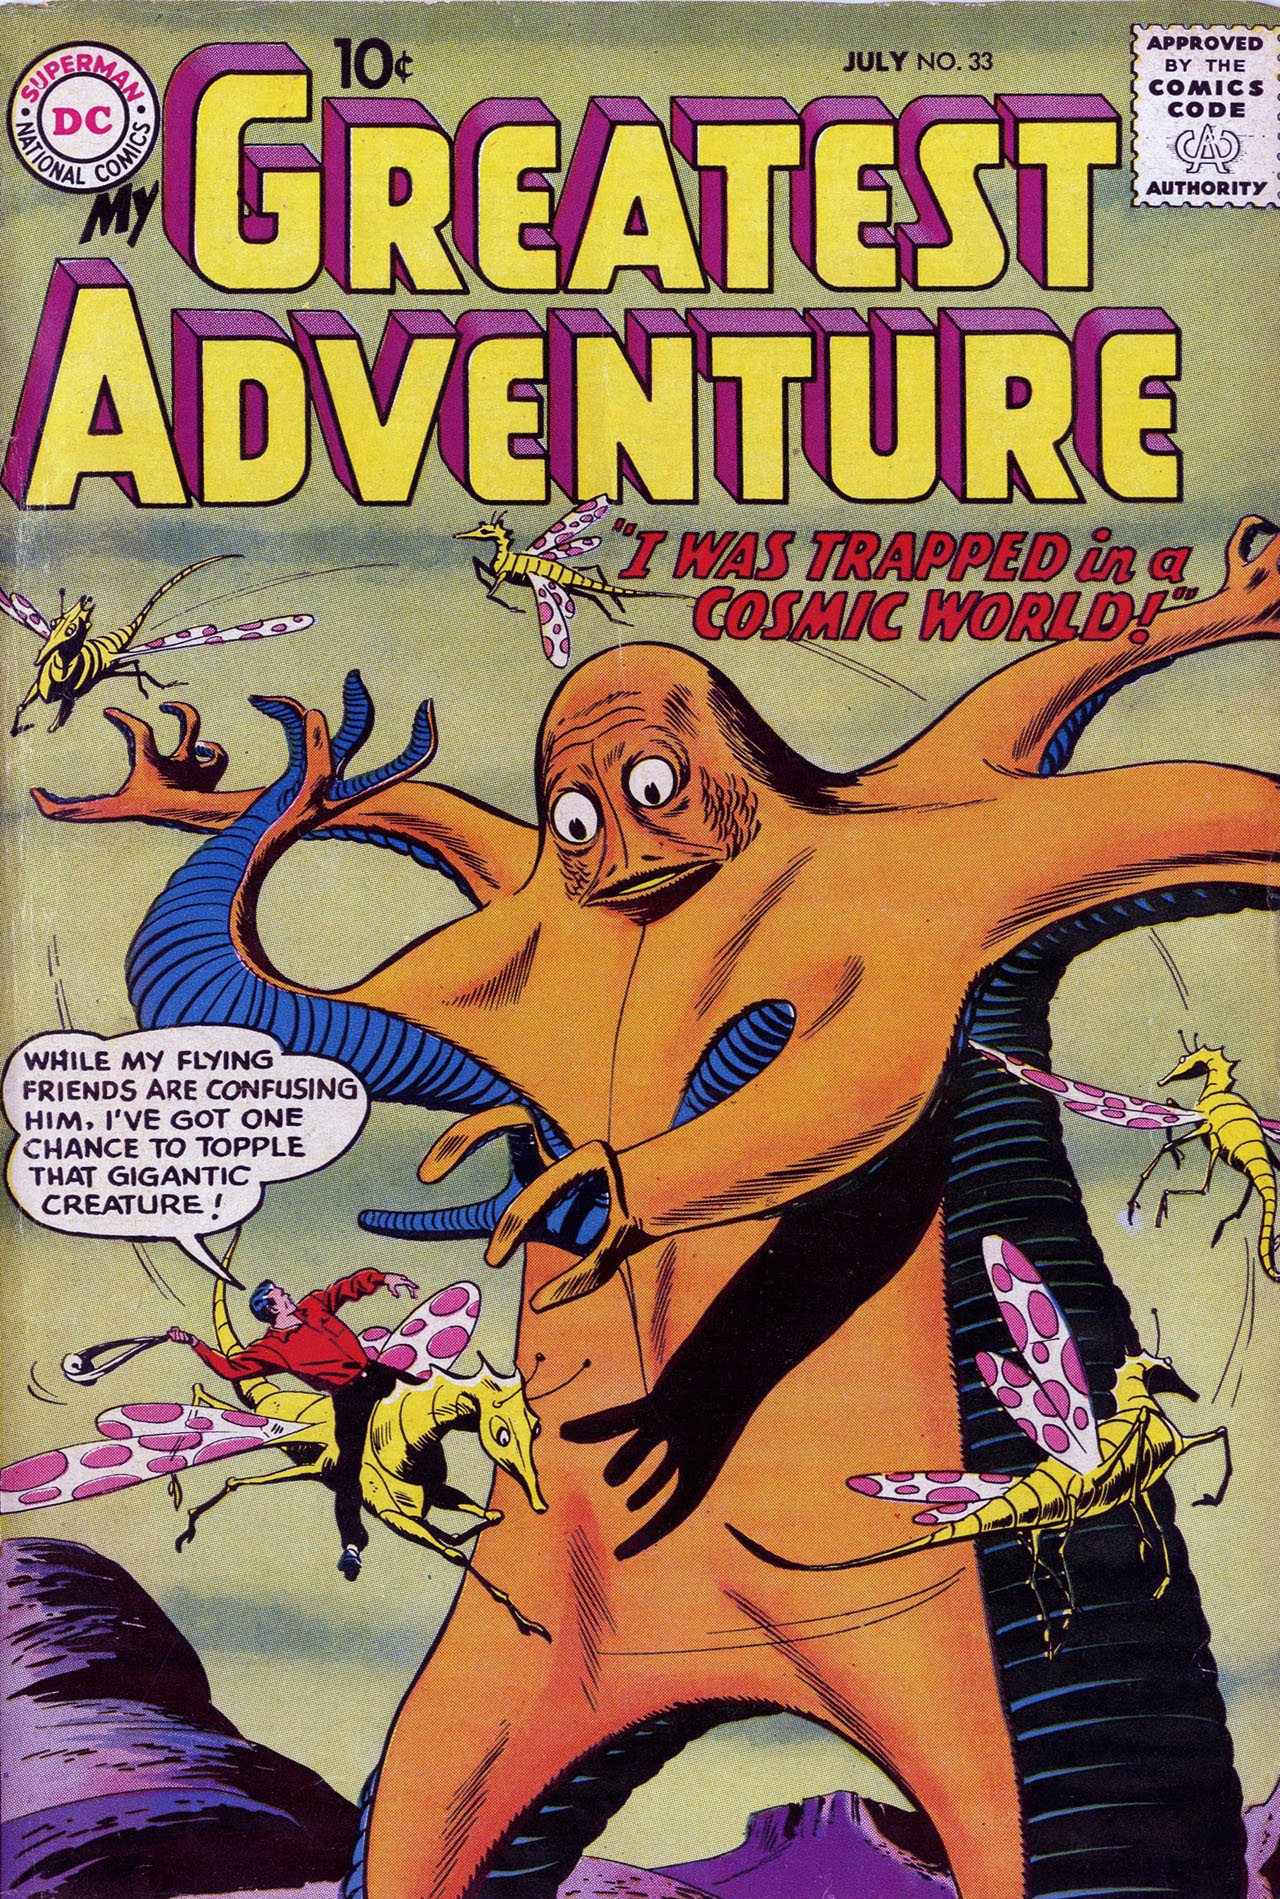 My Greatest Adventure (1955) issue 33 - Page 1